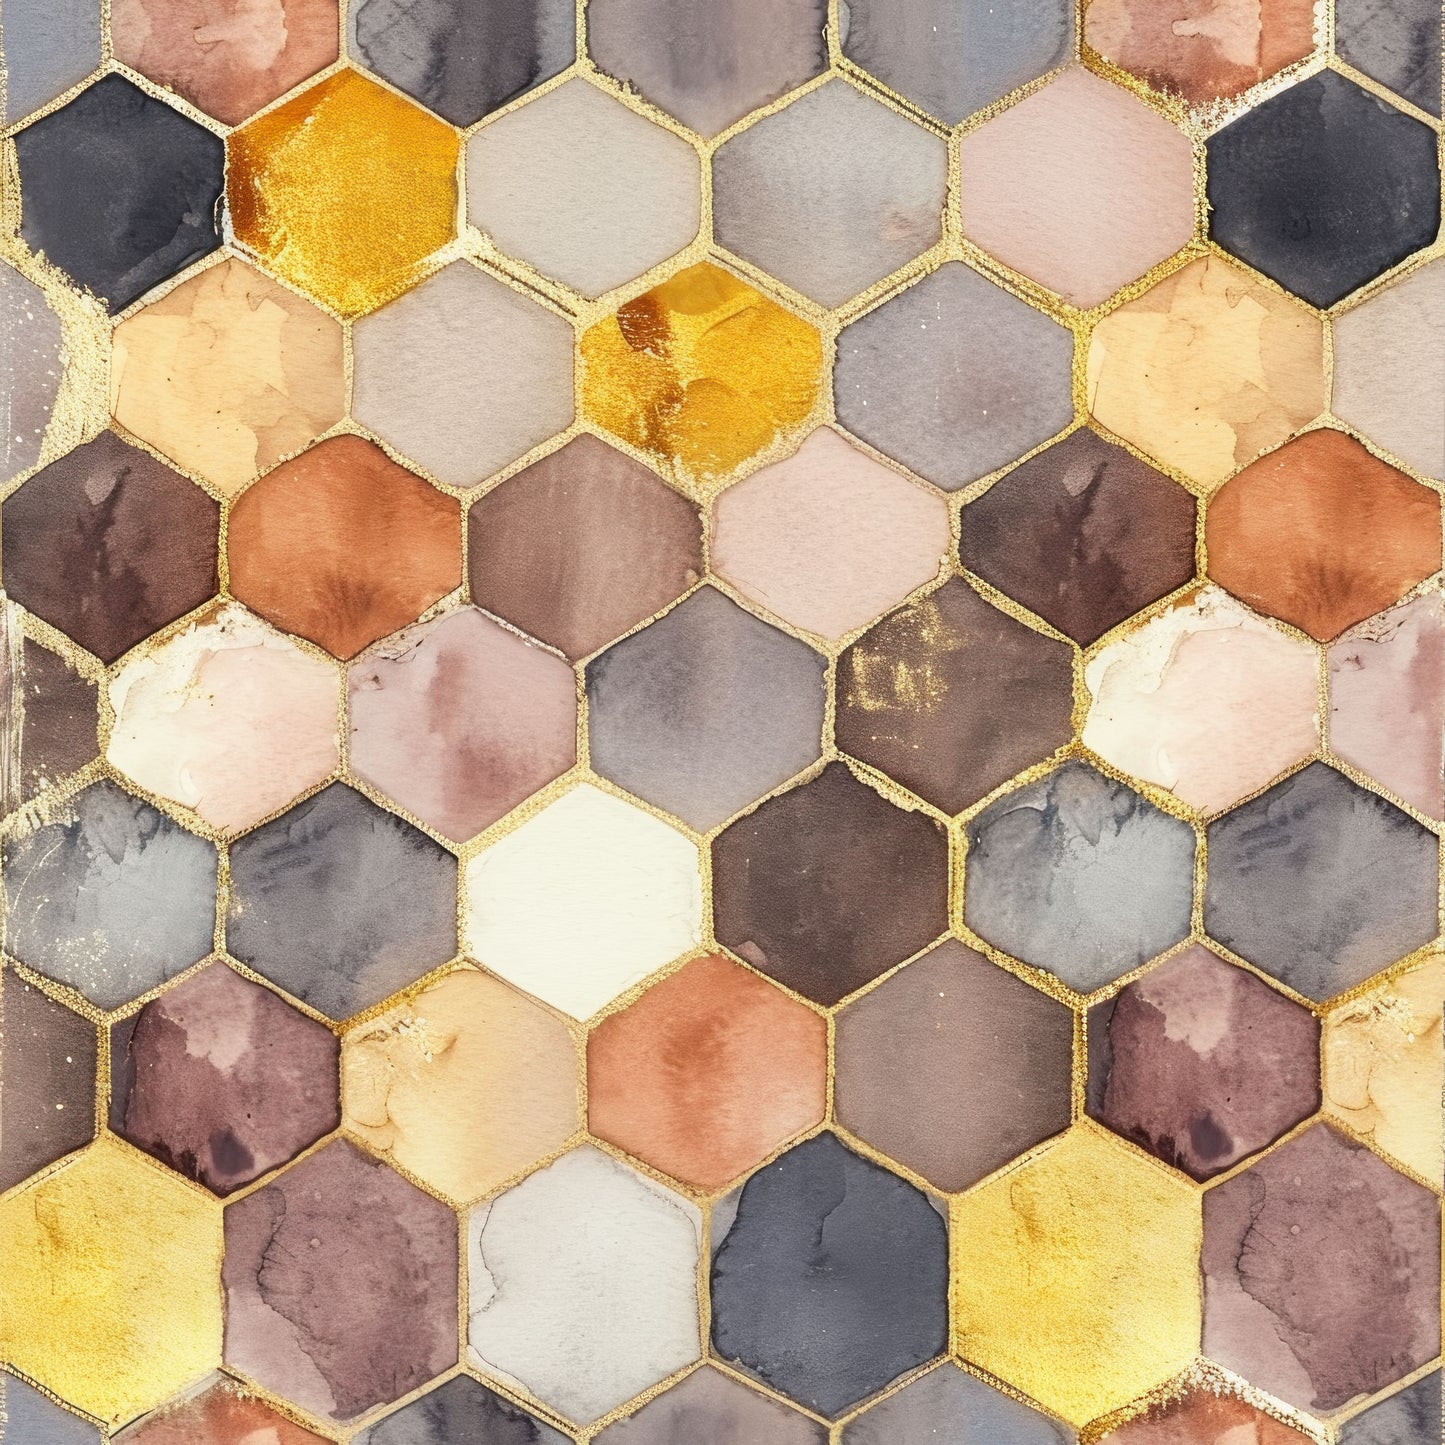 PAINTED HONEYCOMB - MULTIPLE VARIATIONS